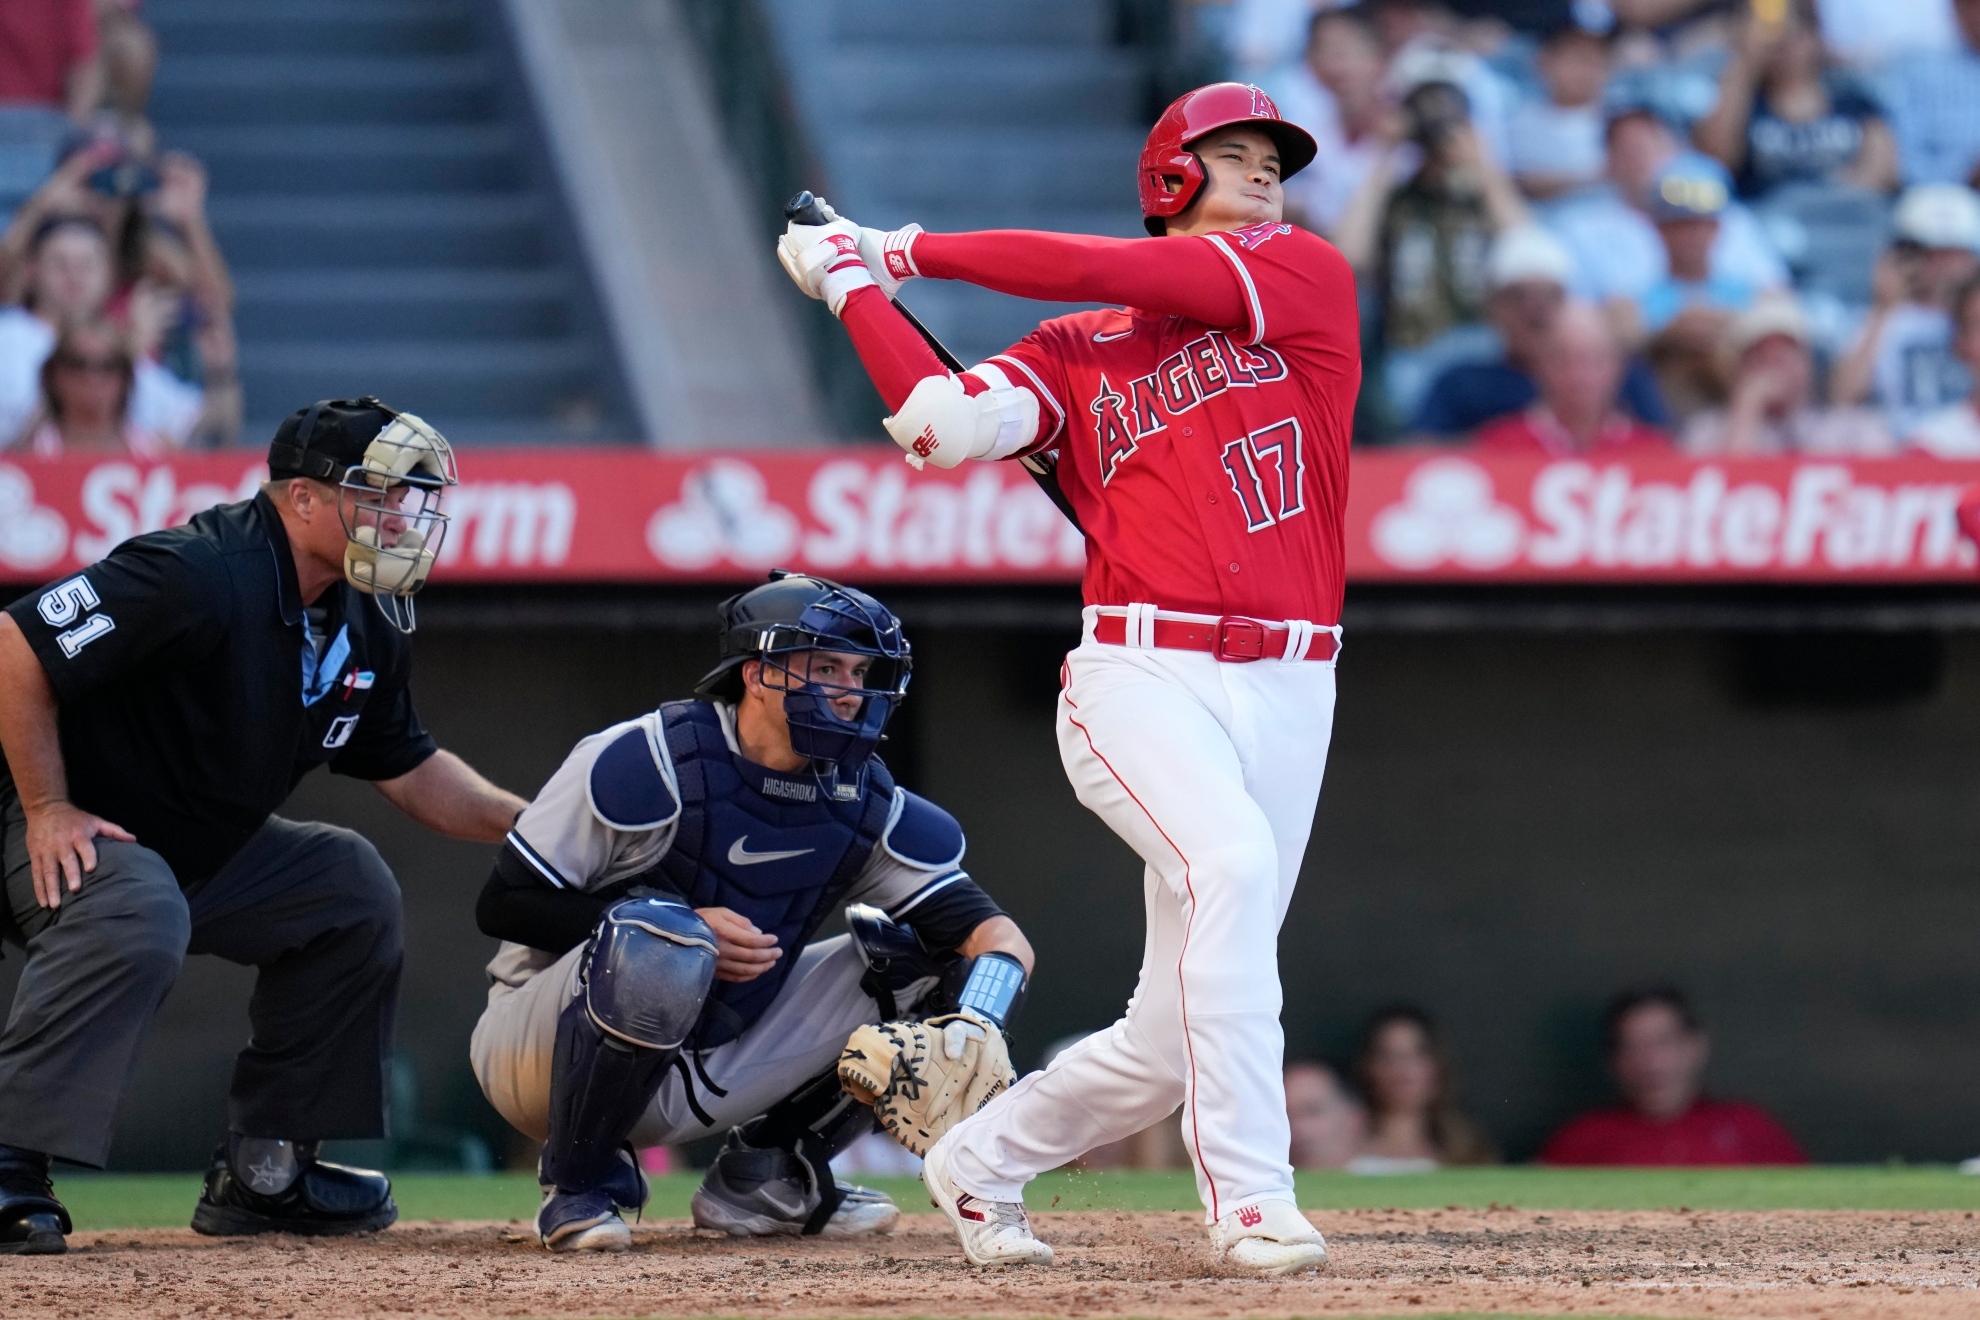 Shohei Ohtani gets his 35th HR for the Angels